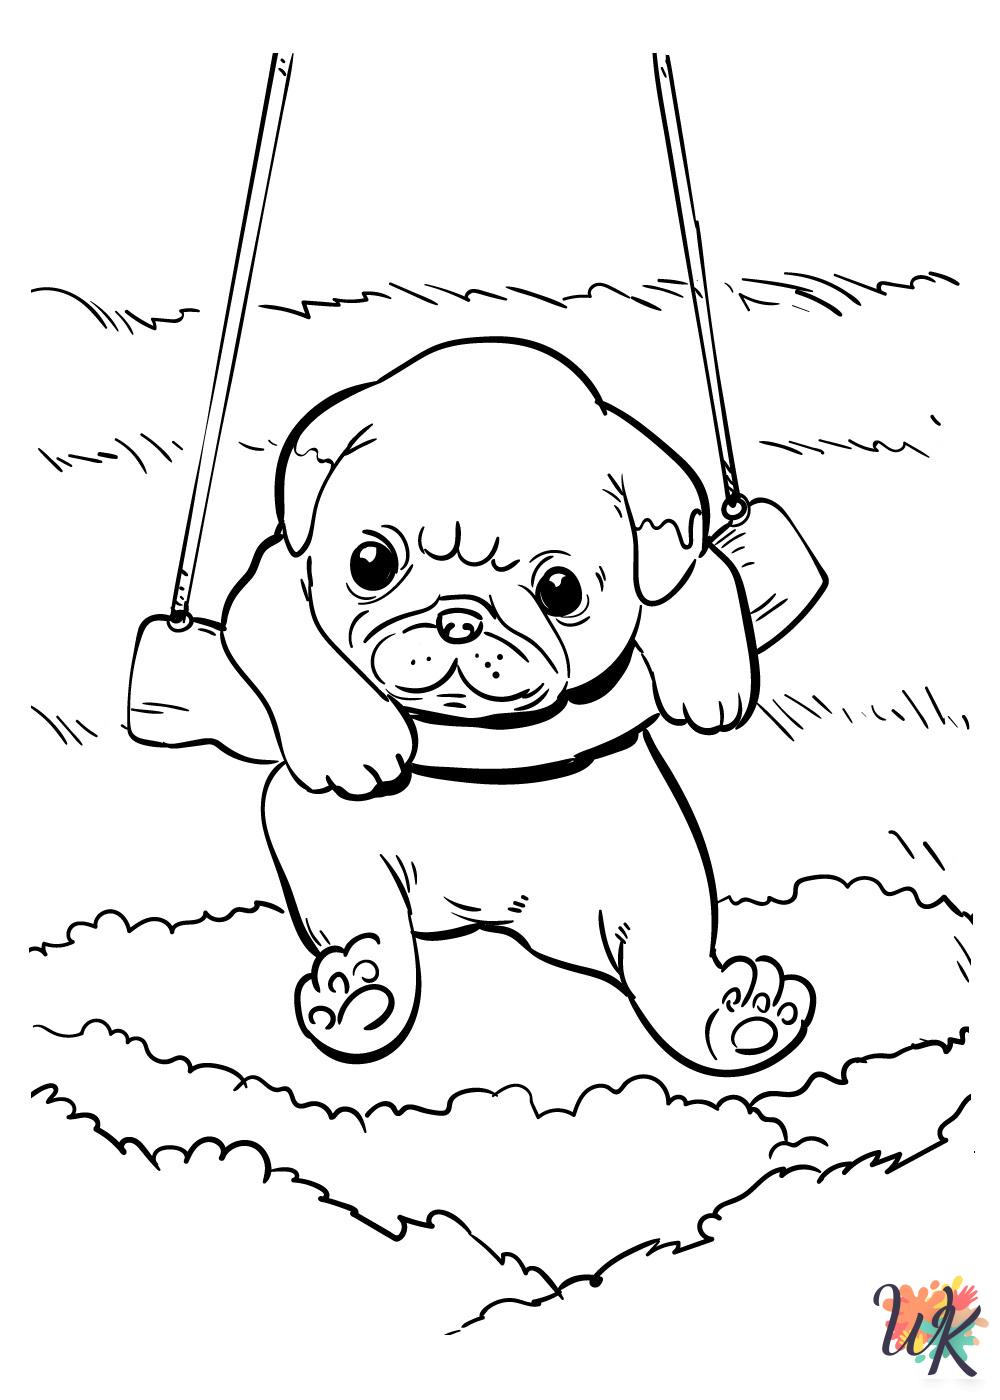 Cute Animals coloring pages for kids